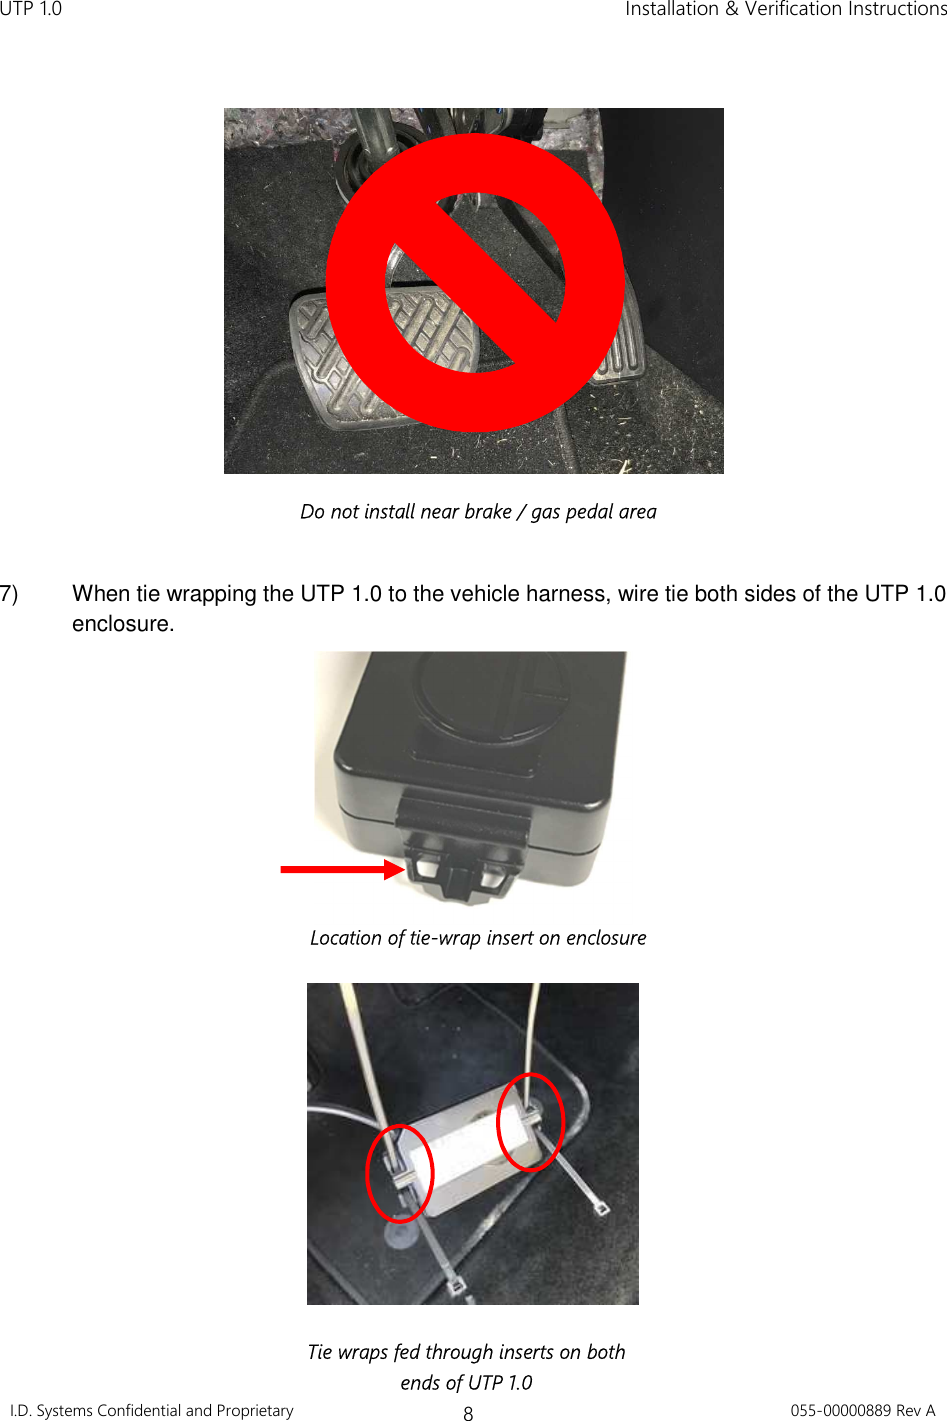 UTP 1.0    Installation &amp; Verification Instructions I.D. Systems Confidential and Proprietary 8 055-00000889 Rev A      7)  When tie wrapping the UTP 1.0 to the vehicle harness, wire tie both sides of the UTP 1.0 enclosure.     Tie wraps fed through inserts on both ends of UTP 1.0 Location of tie-wrap insert on enclosure Do not install near brake / gas pedal area 